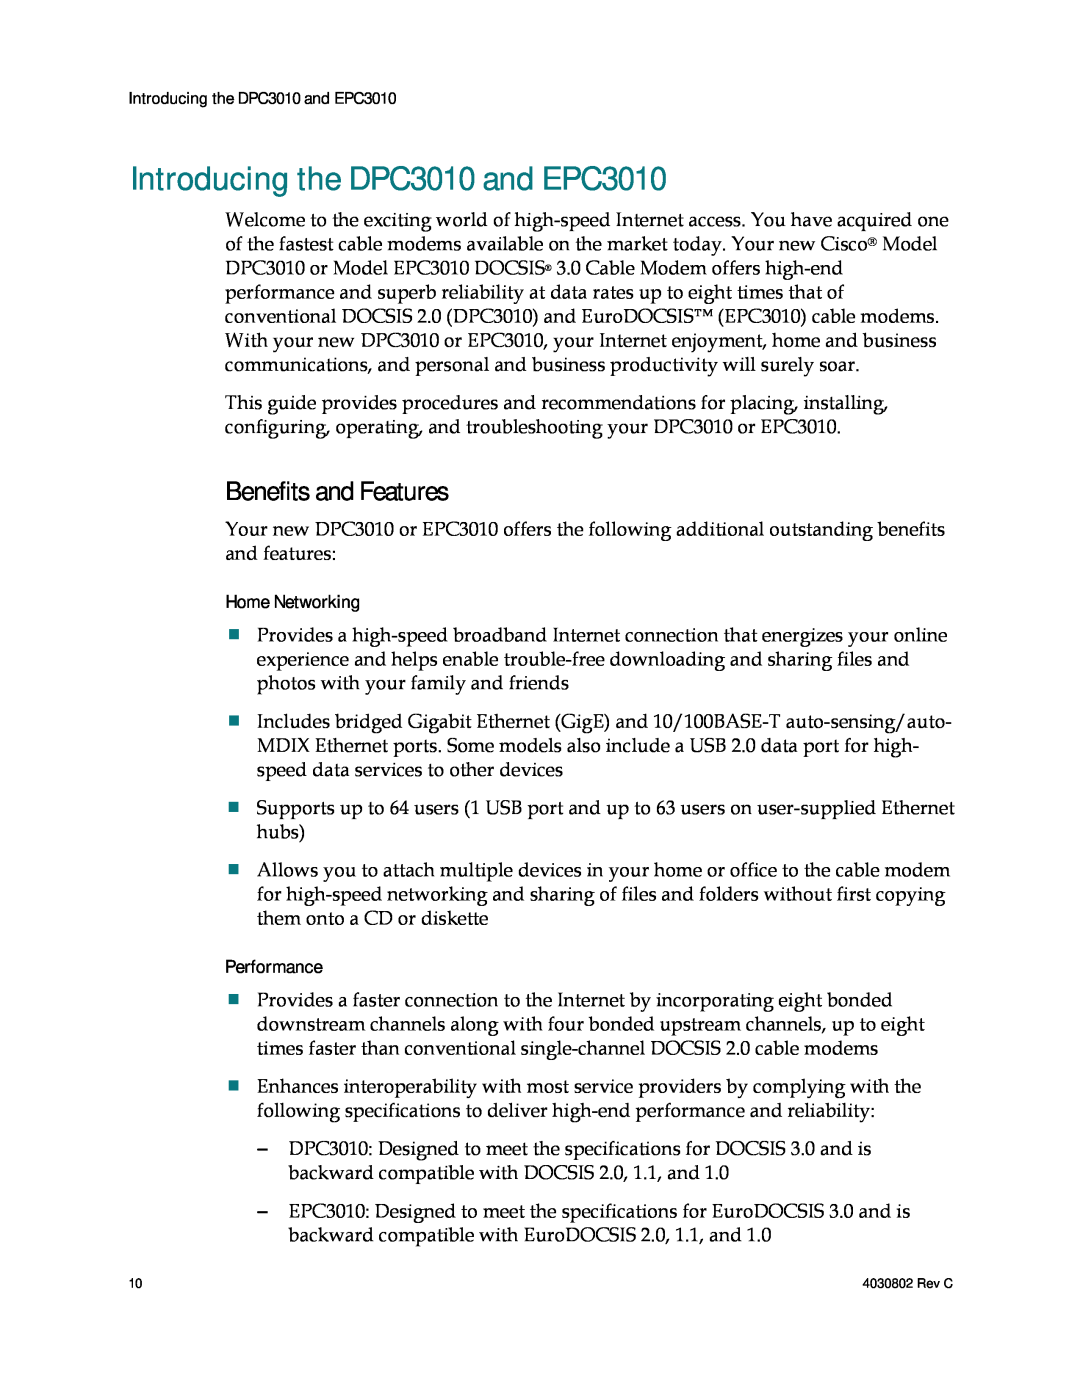 Cisco Systems 4027668 Introducing the DPC3010 and EPC3010, Benefits and Features, Home Networking, Performance 